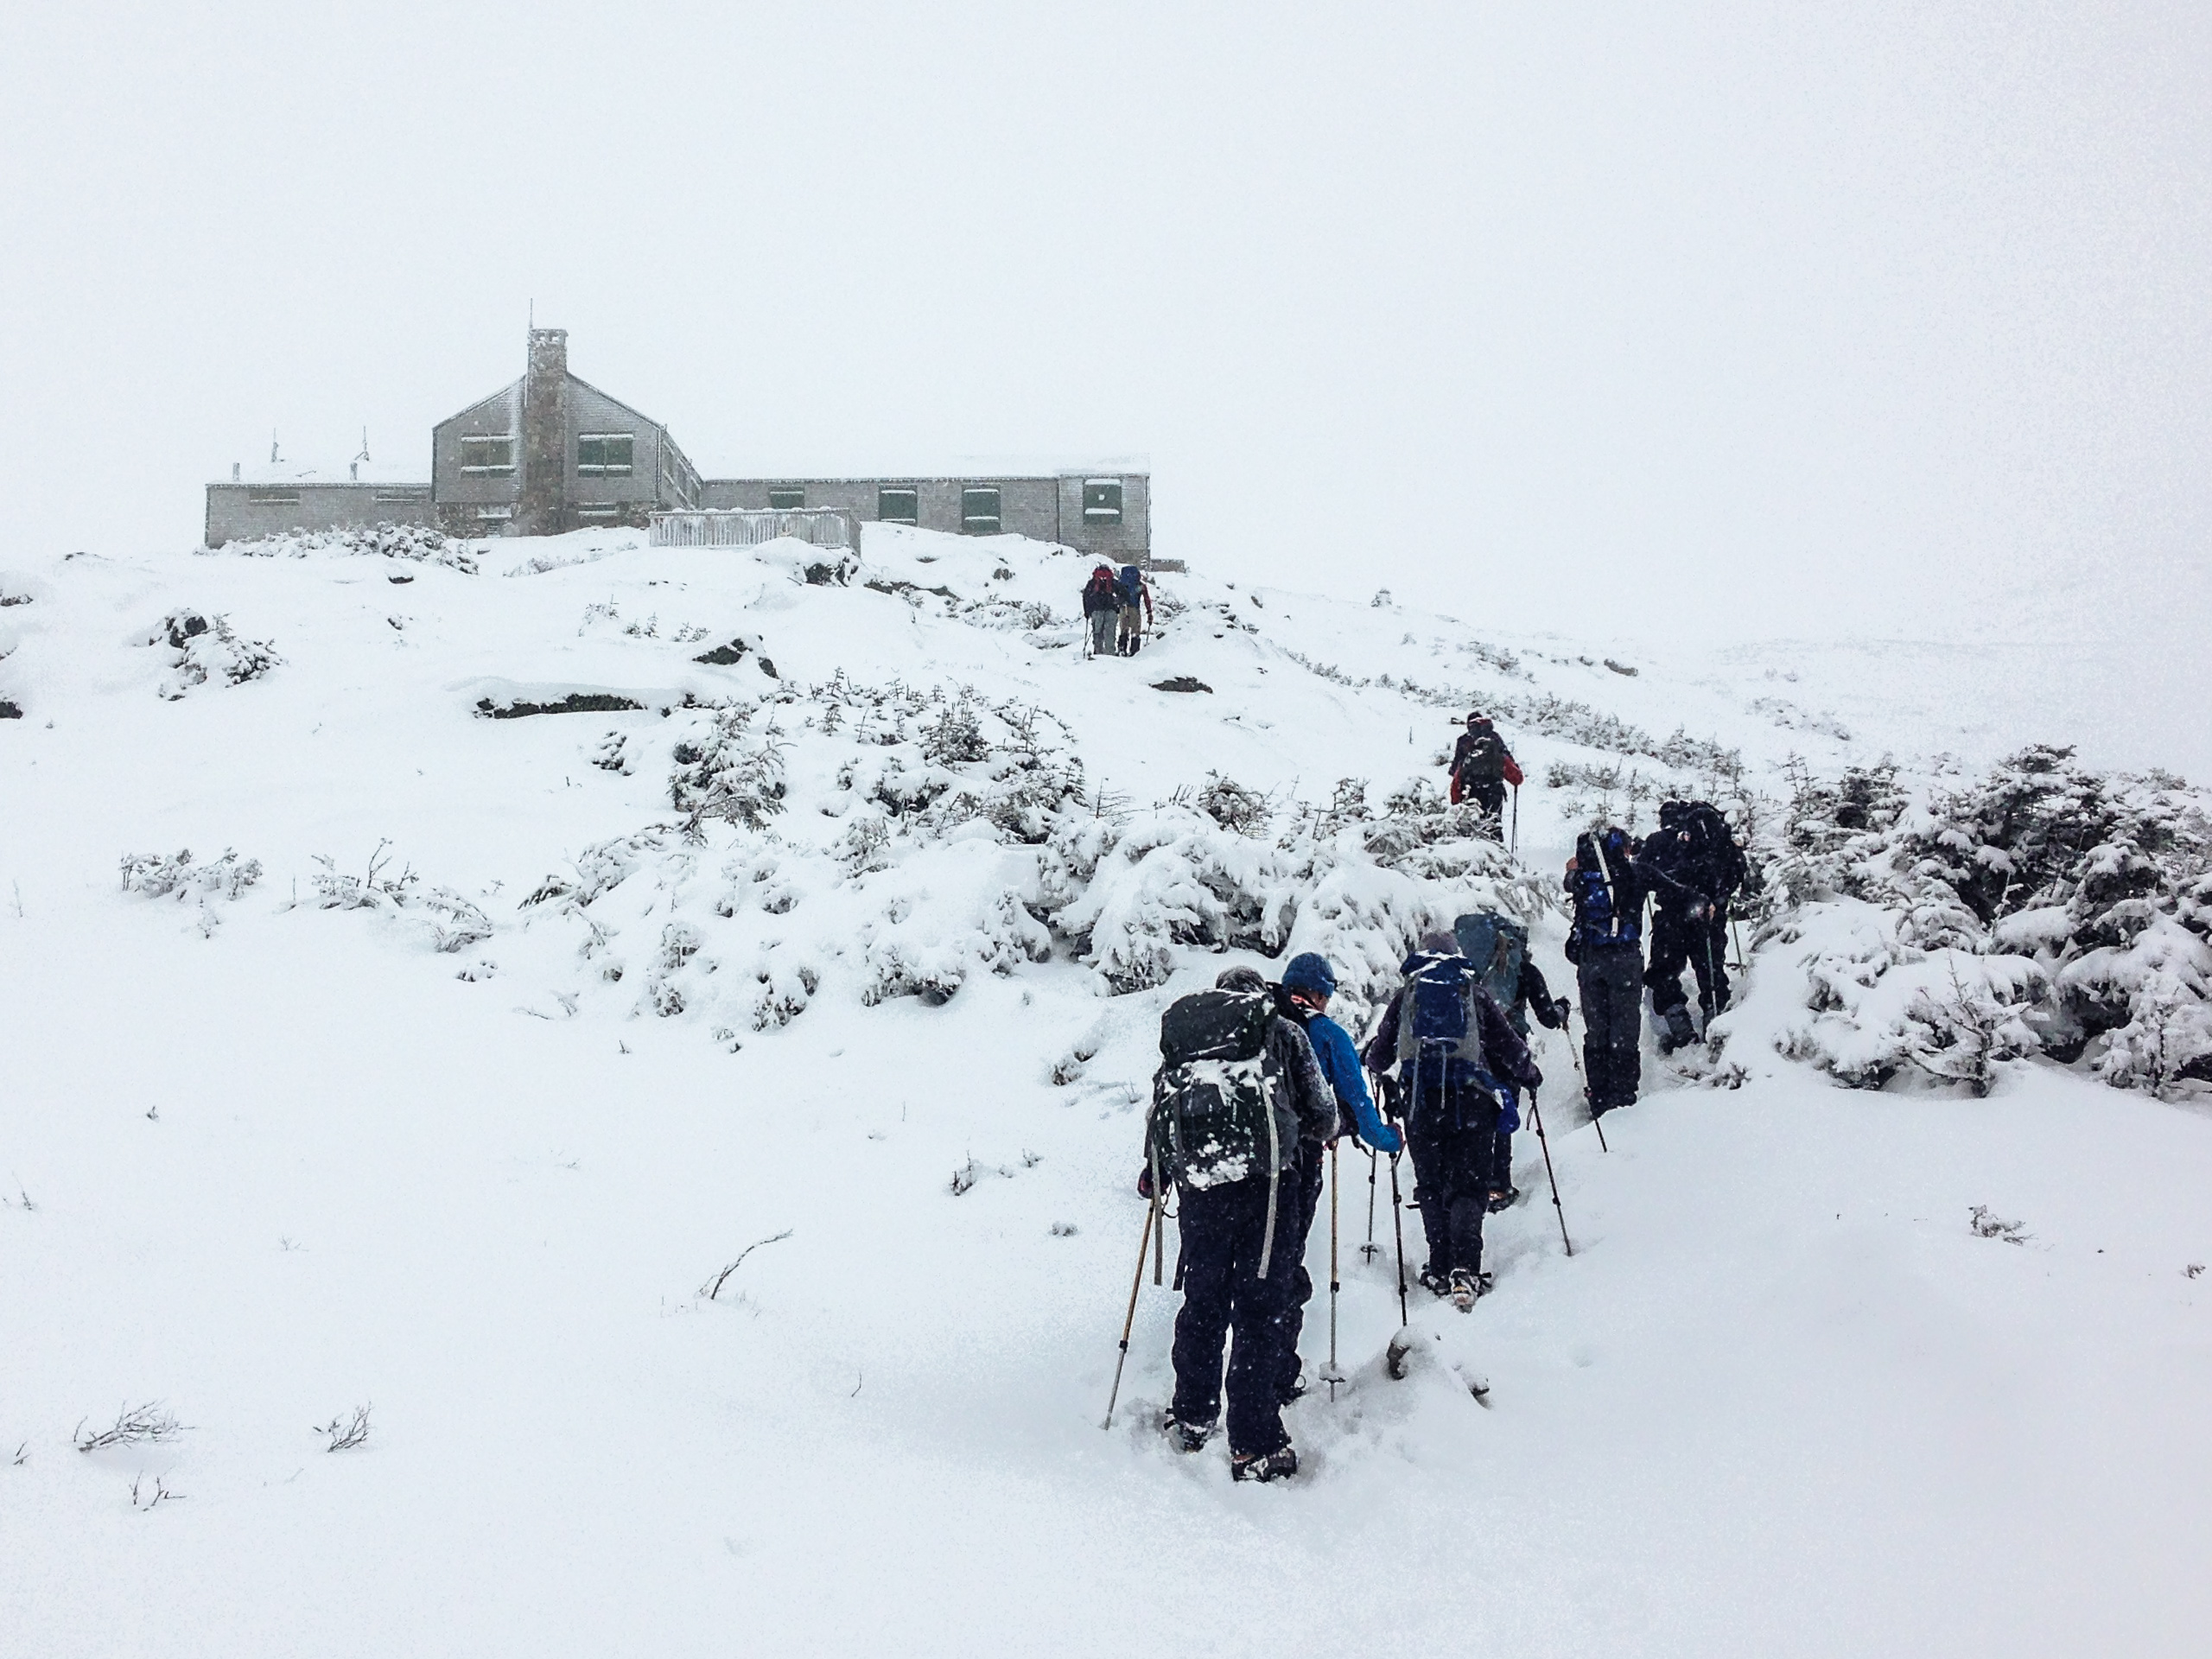 Hikers catch a glimpse of the Lake of the Clouds Hut below Mount Washington's summit.